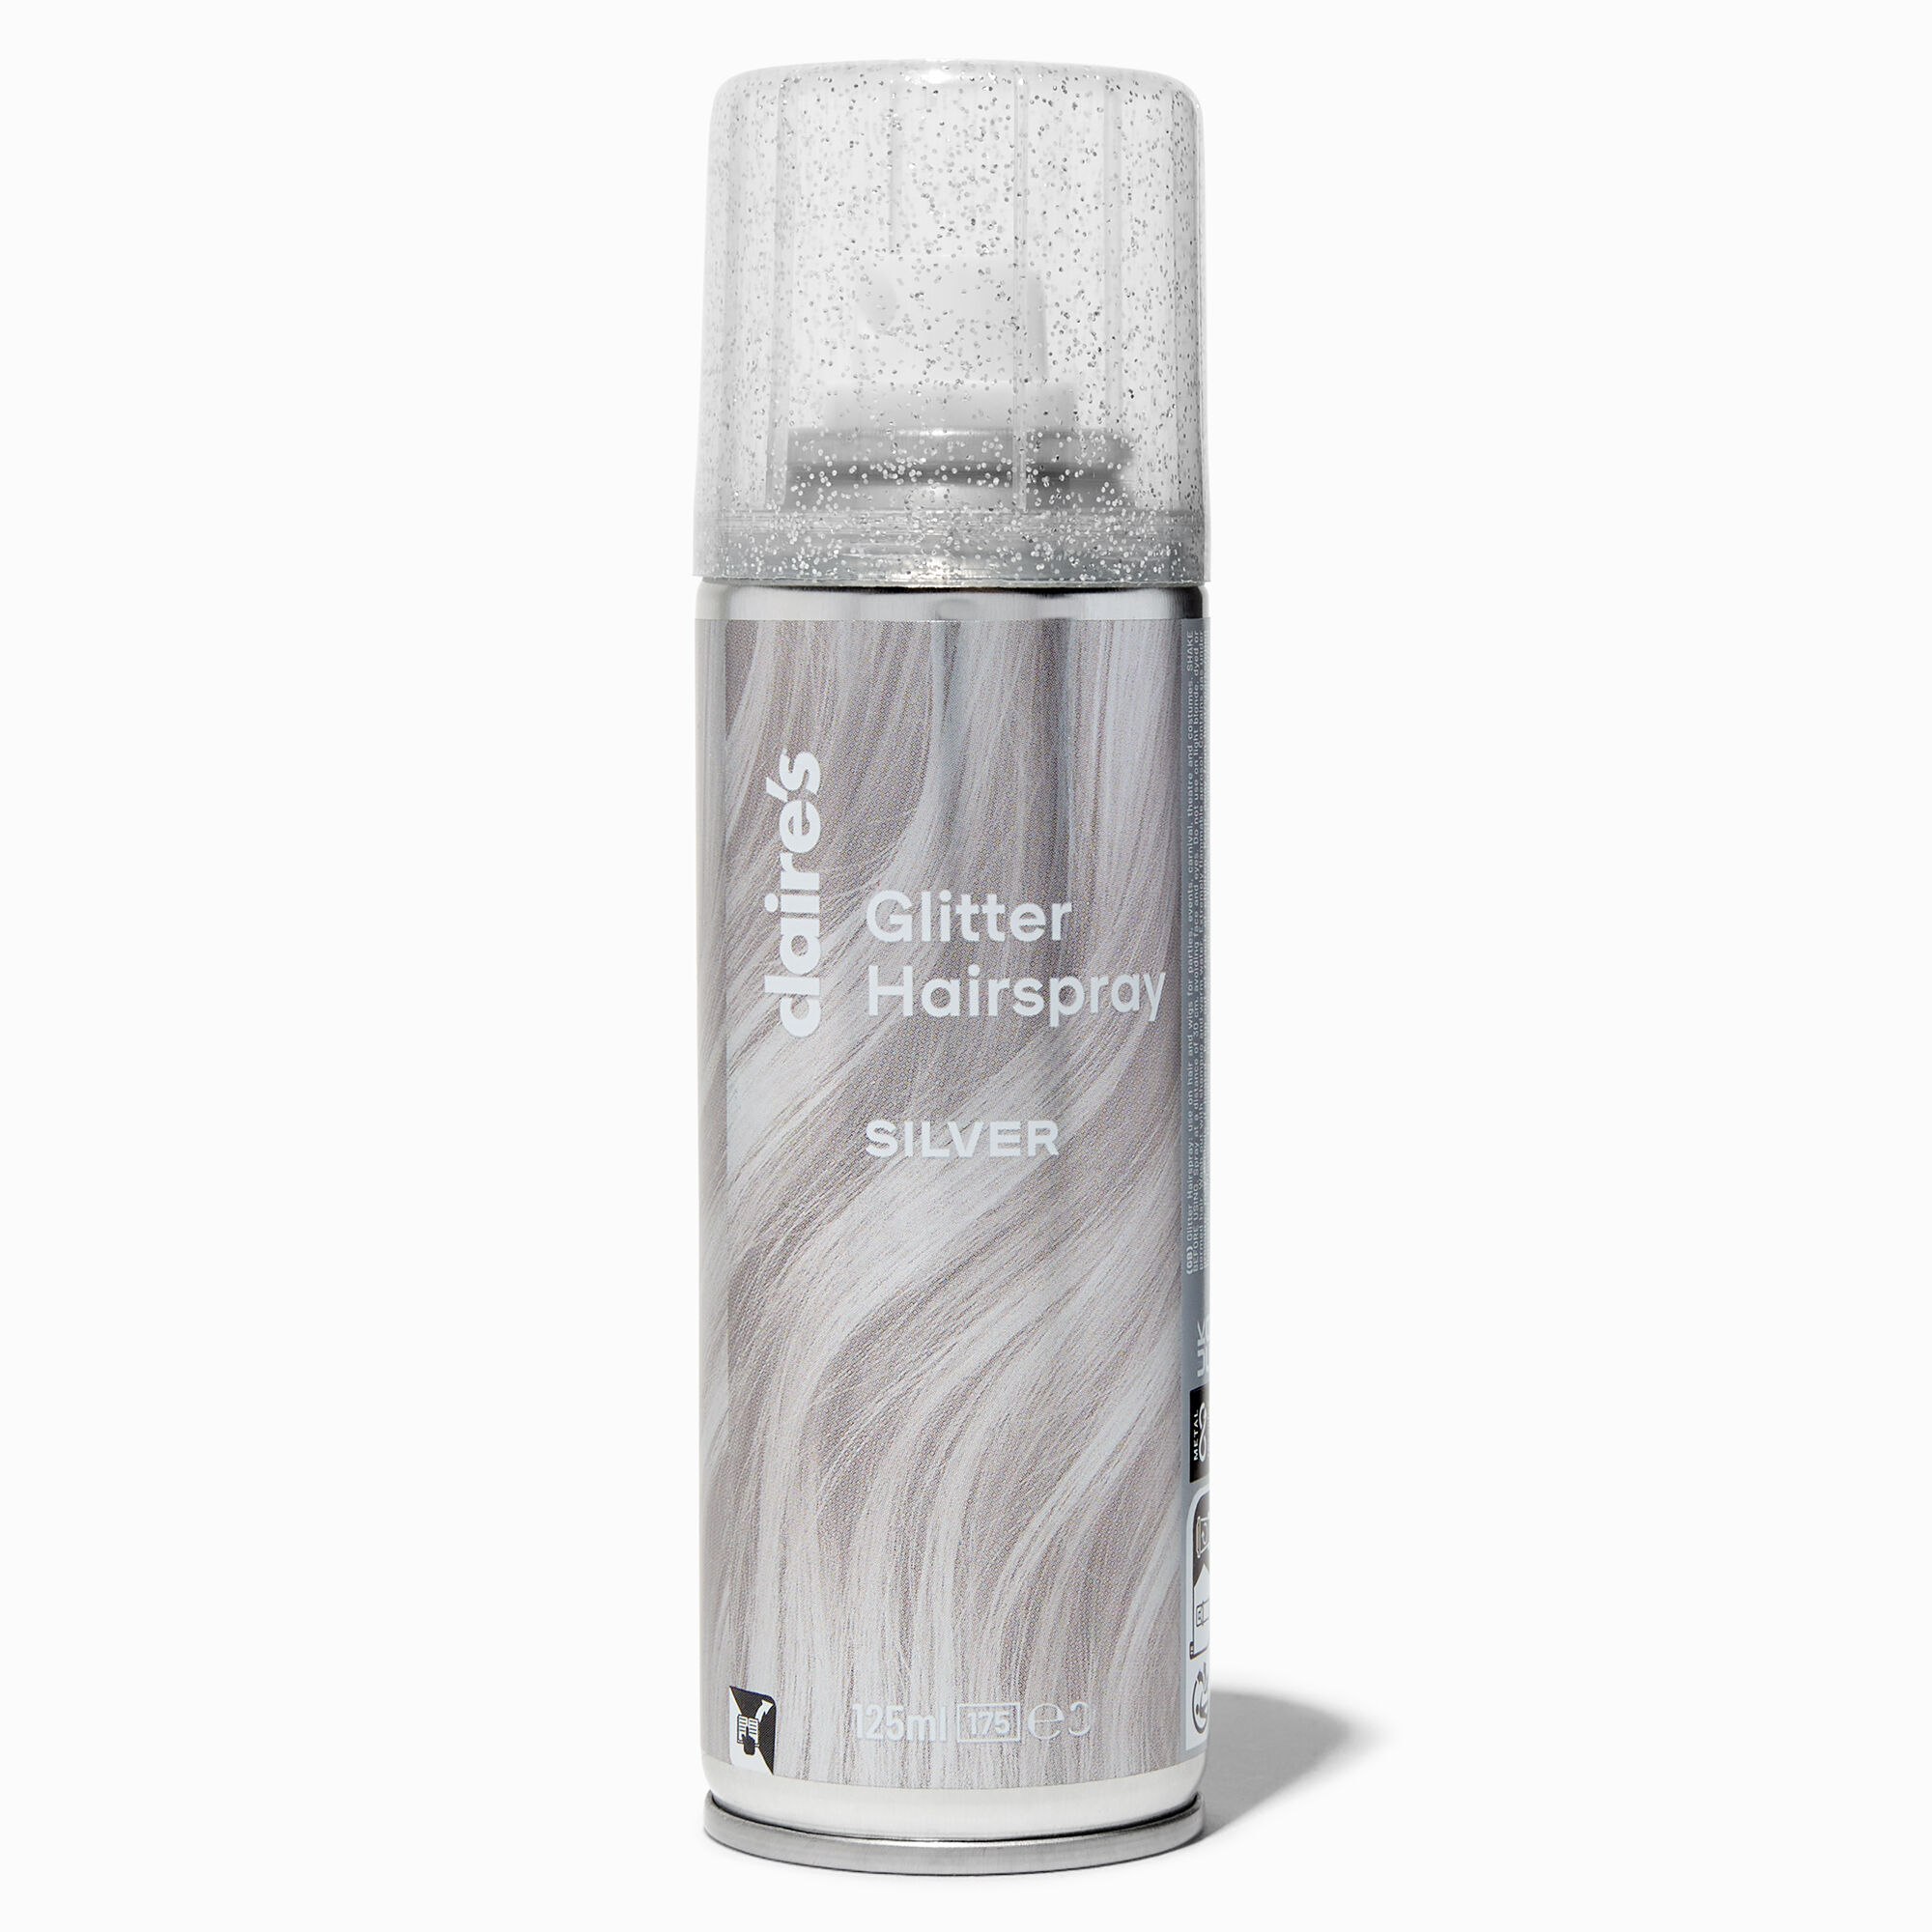 View Claires Glitter Colour Hairspray Silver information